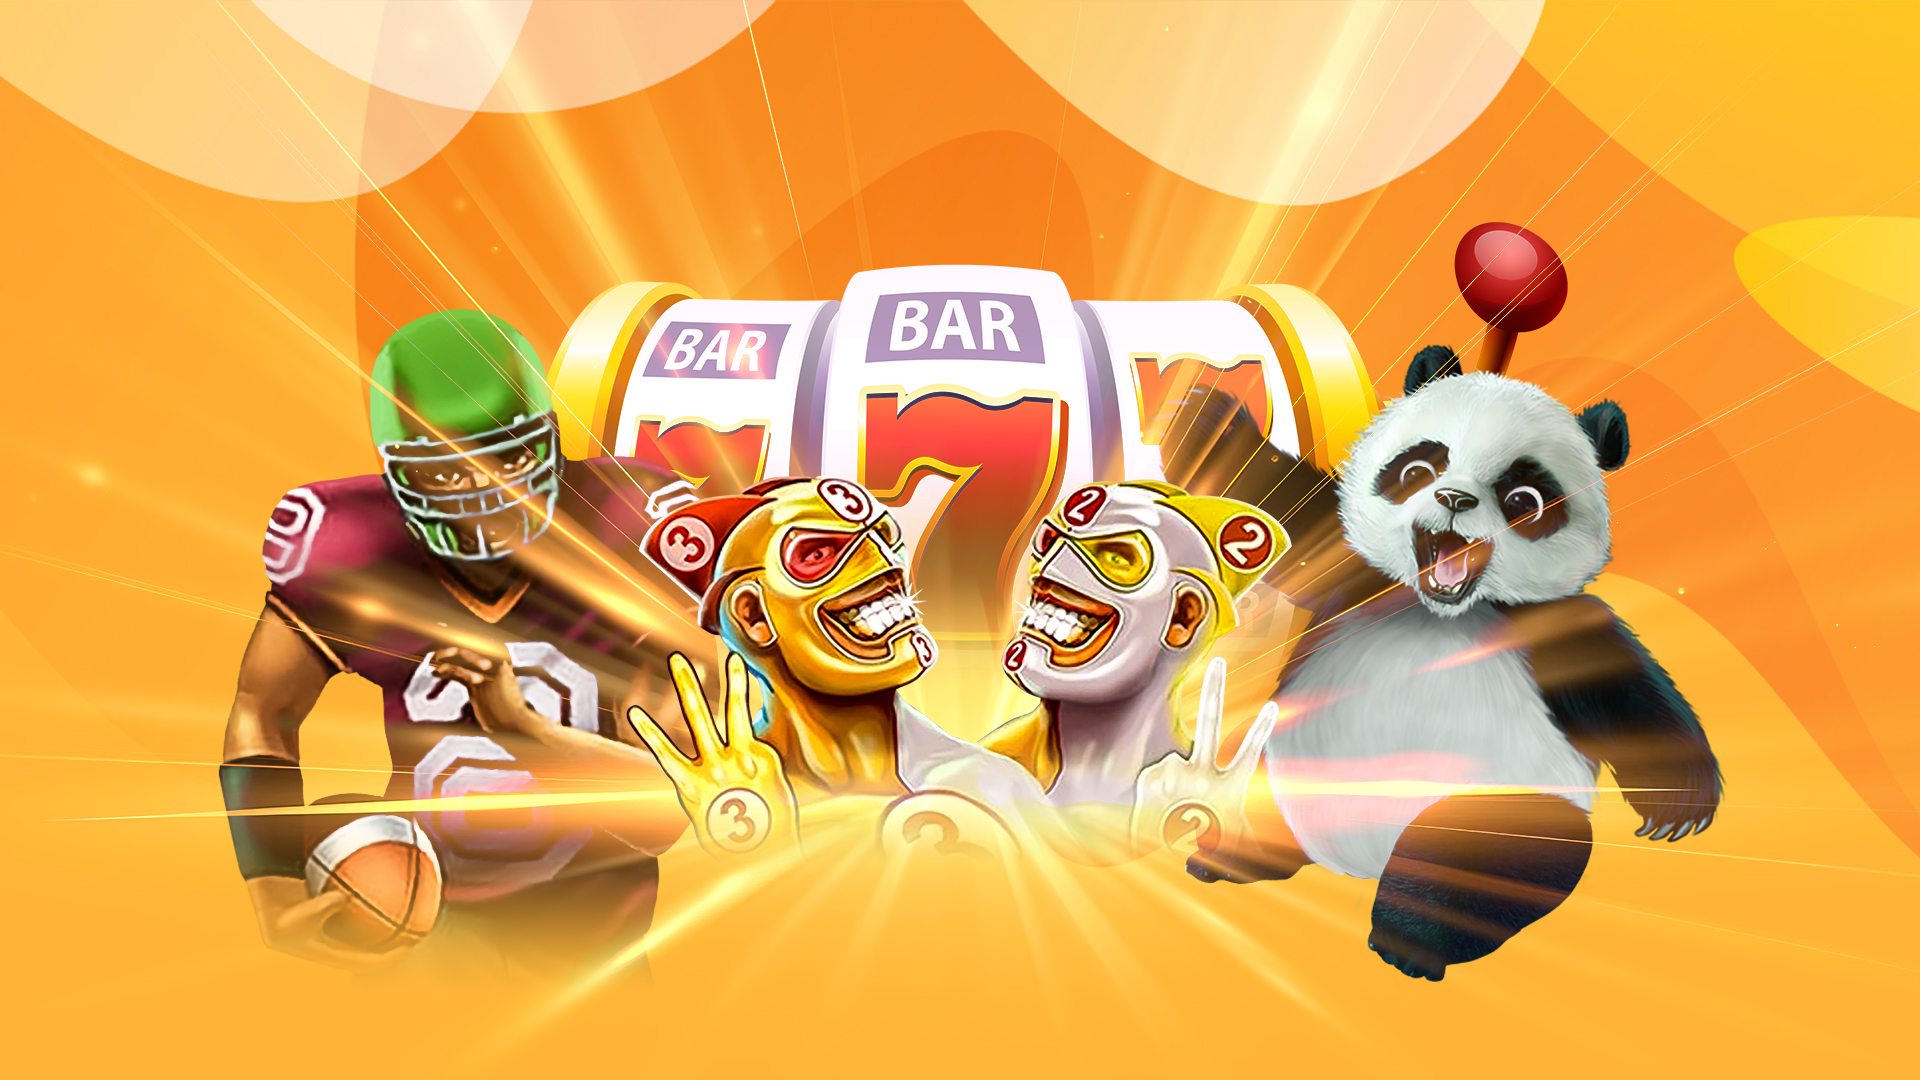 A slot machine reel with characters from SlotsLV slots games in front, on a yellow background.